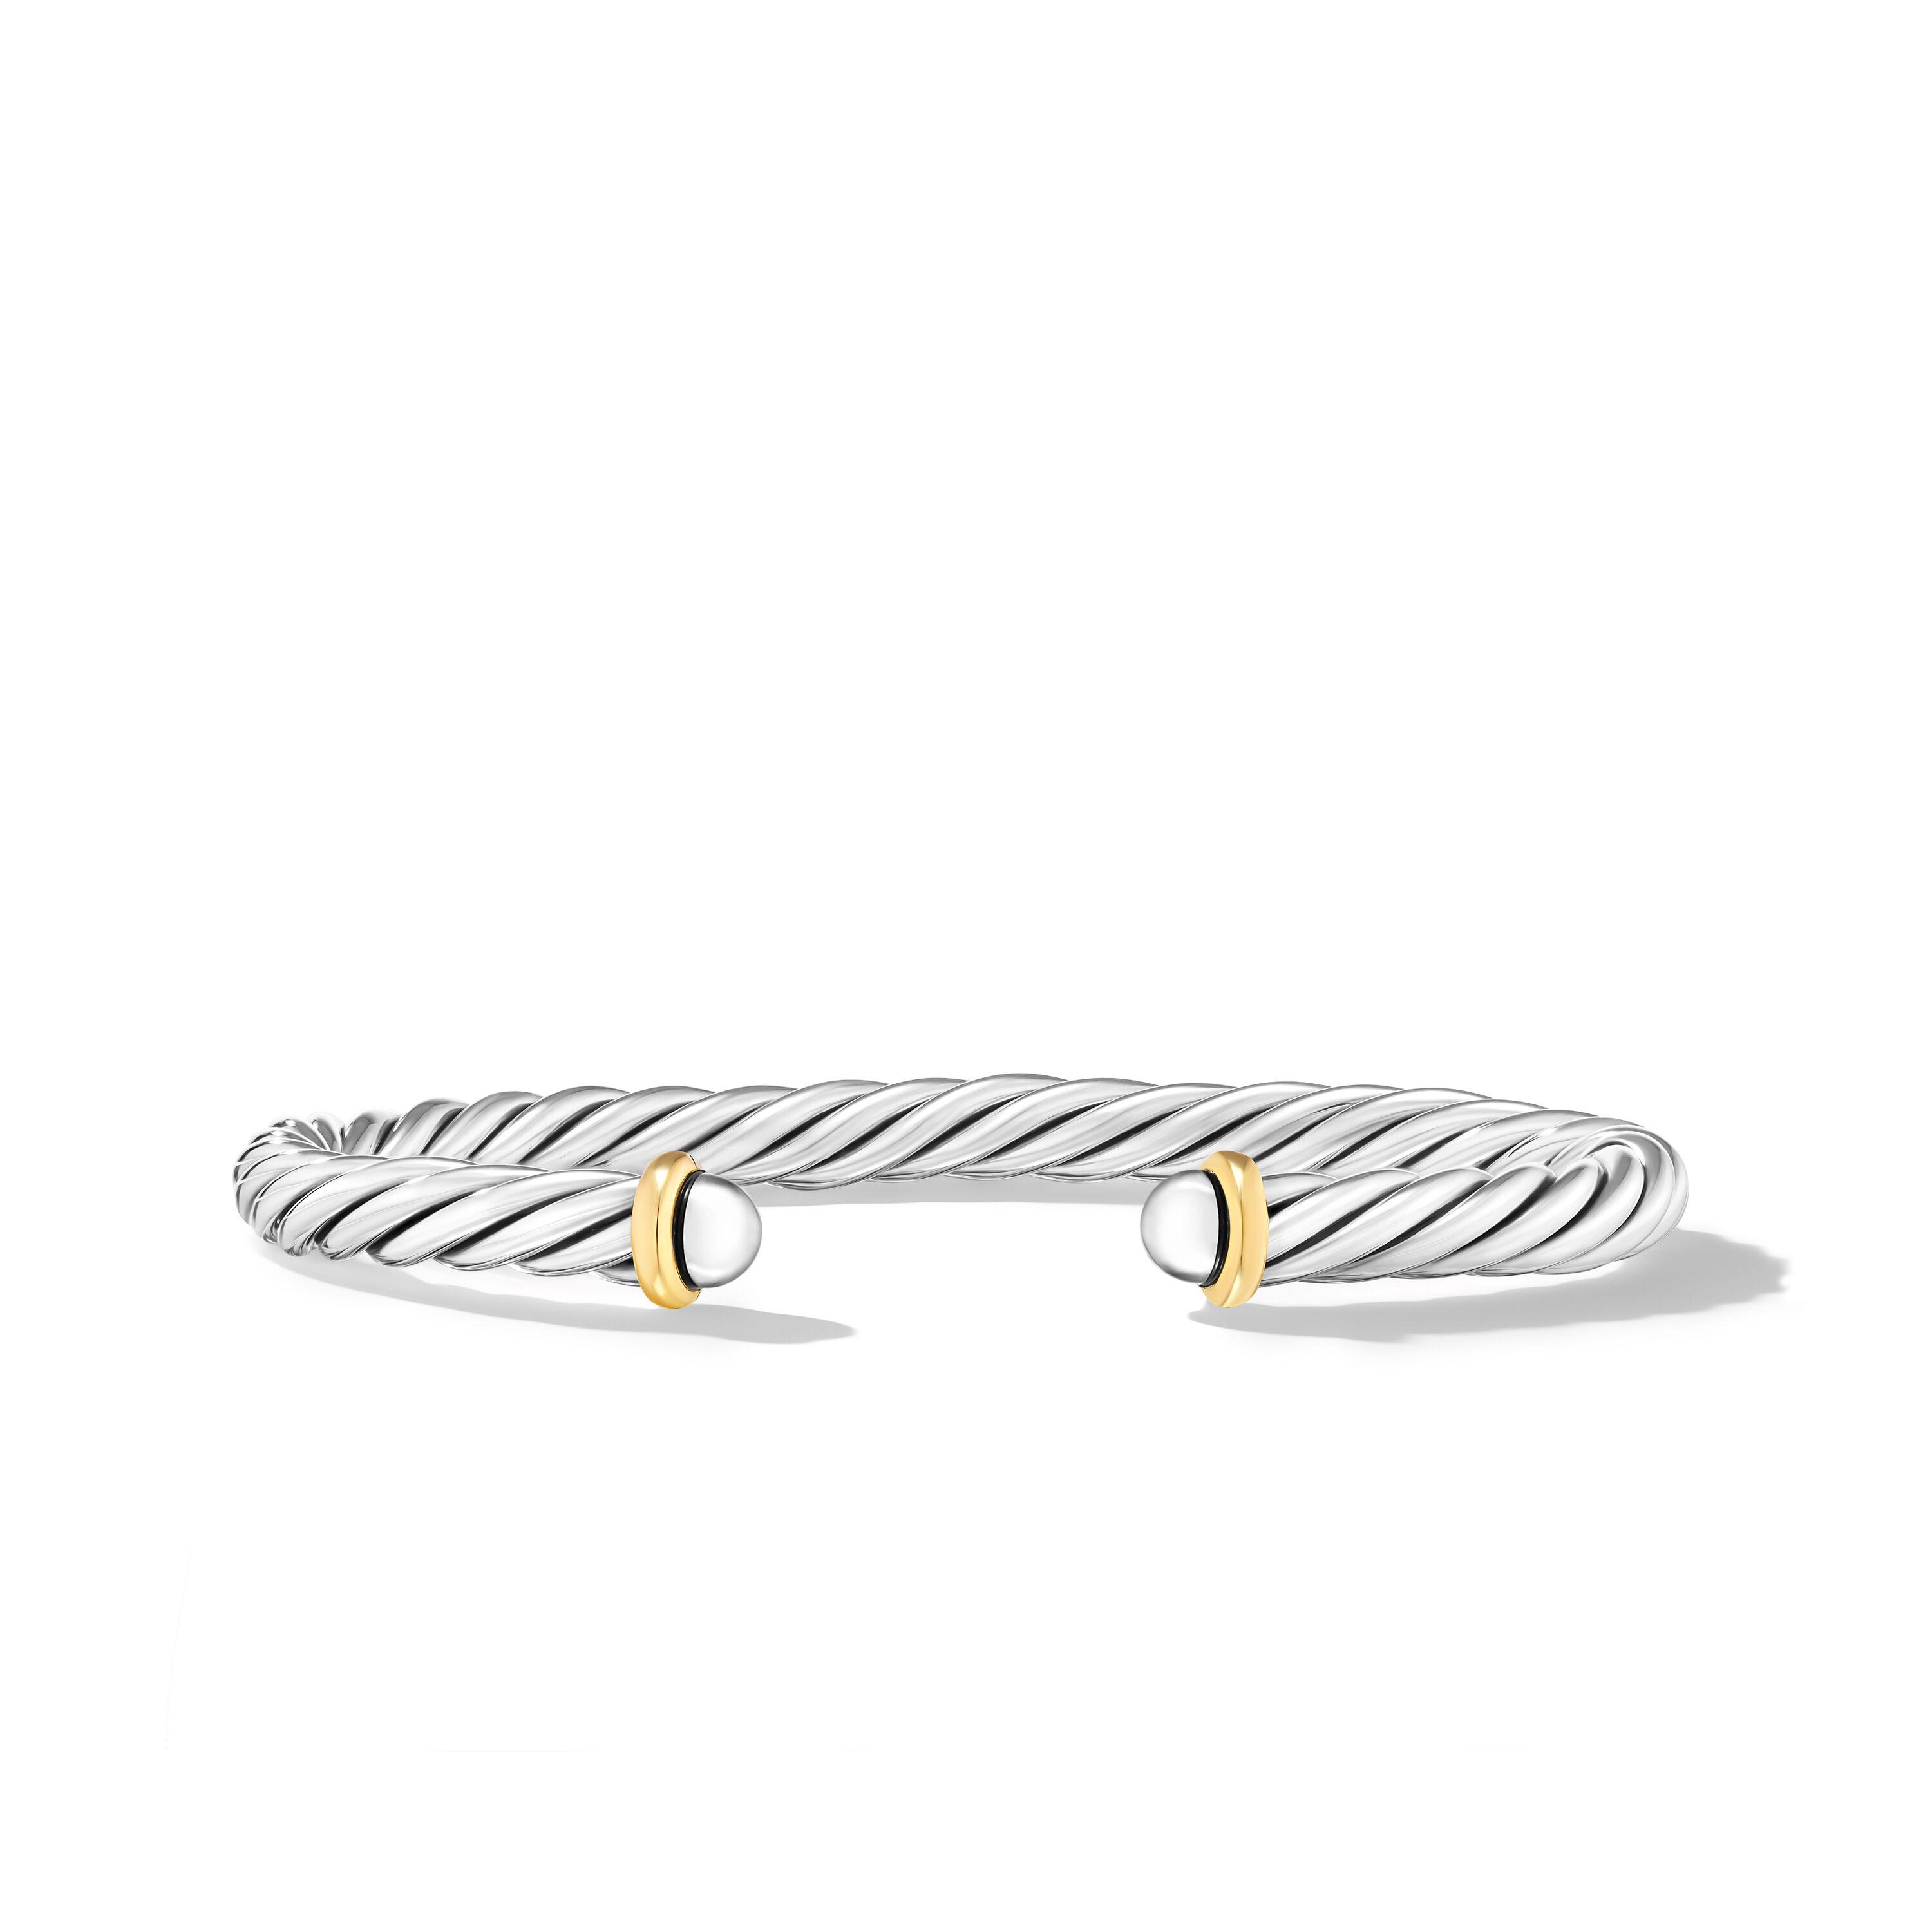 David Yurman 6mm Cable Cuff Bracelet in Sterling Silver with 14K Yellow Gold, Large 0